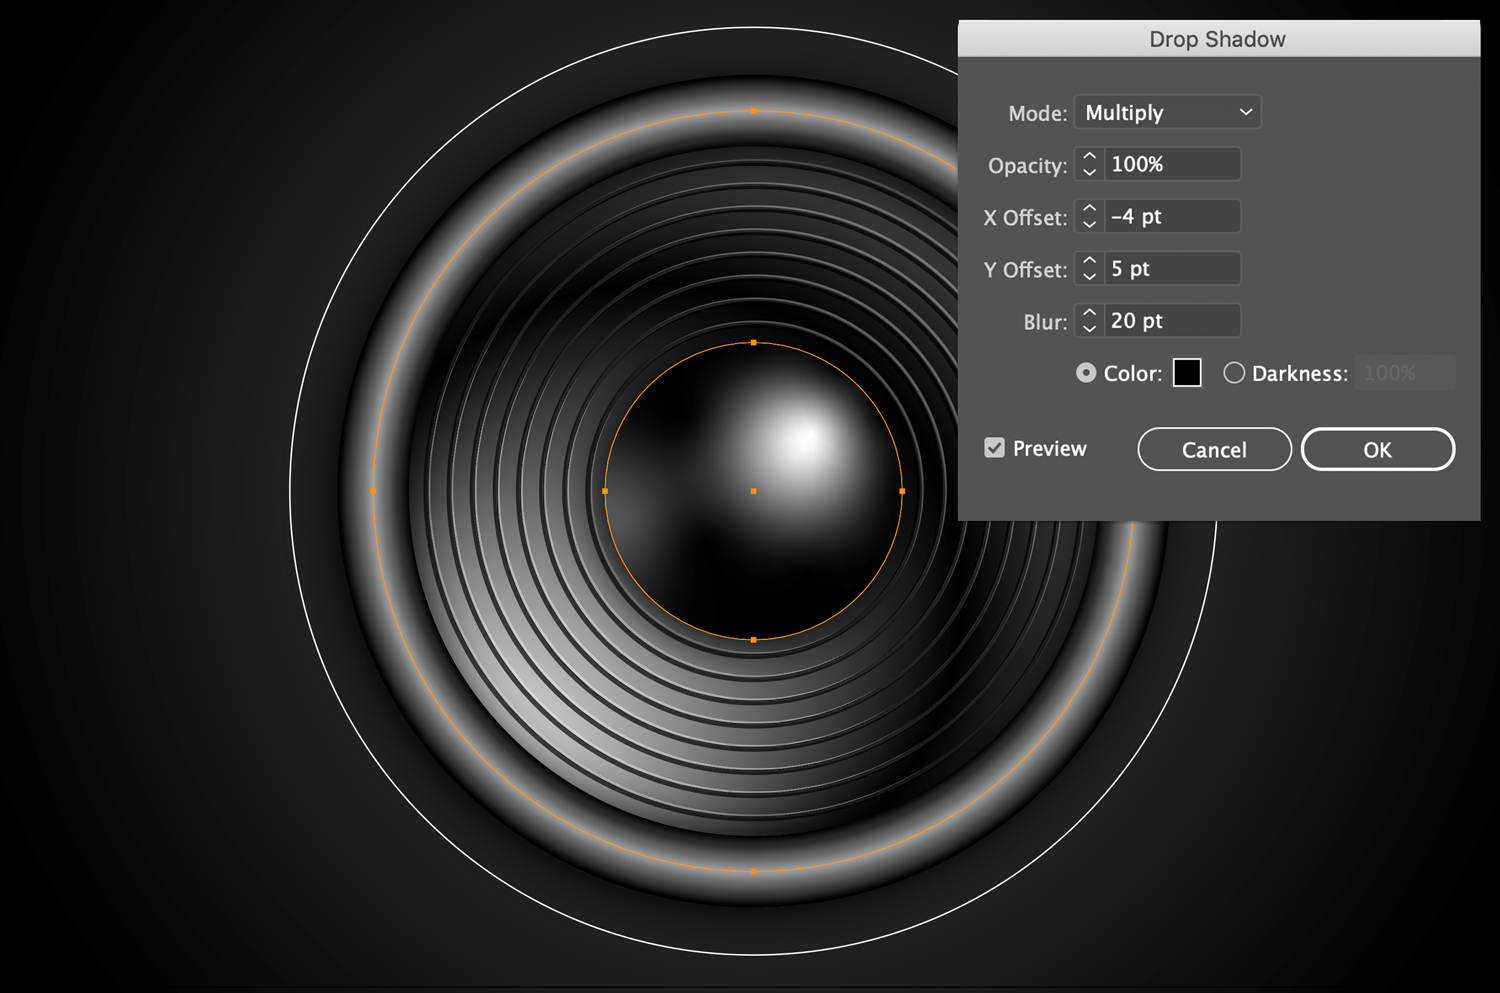 The Drop Shadow effects dialog box applied to the blend circles